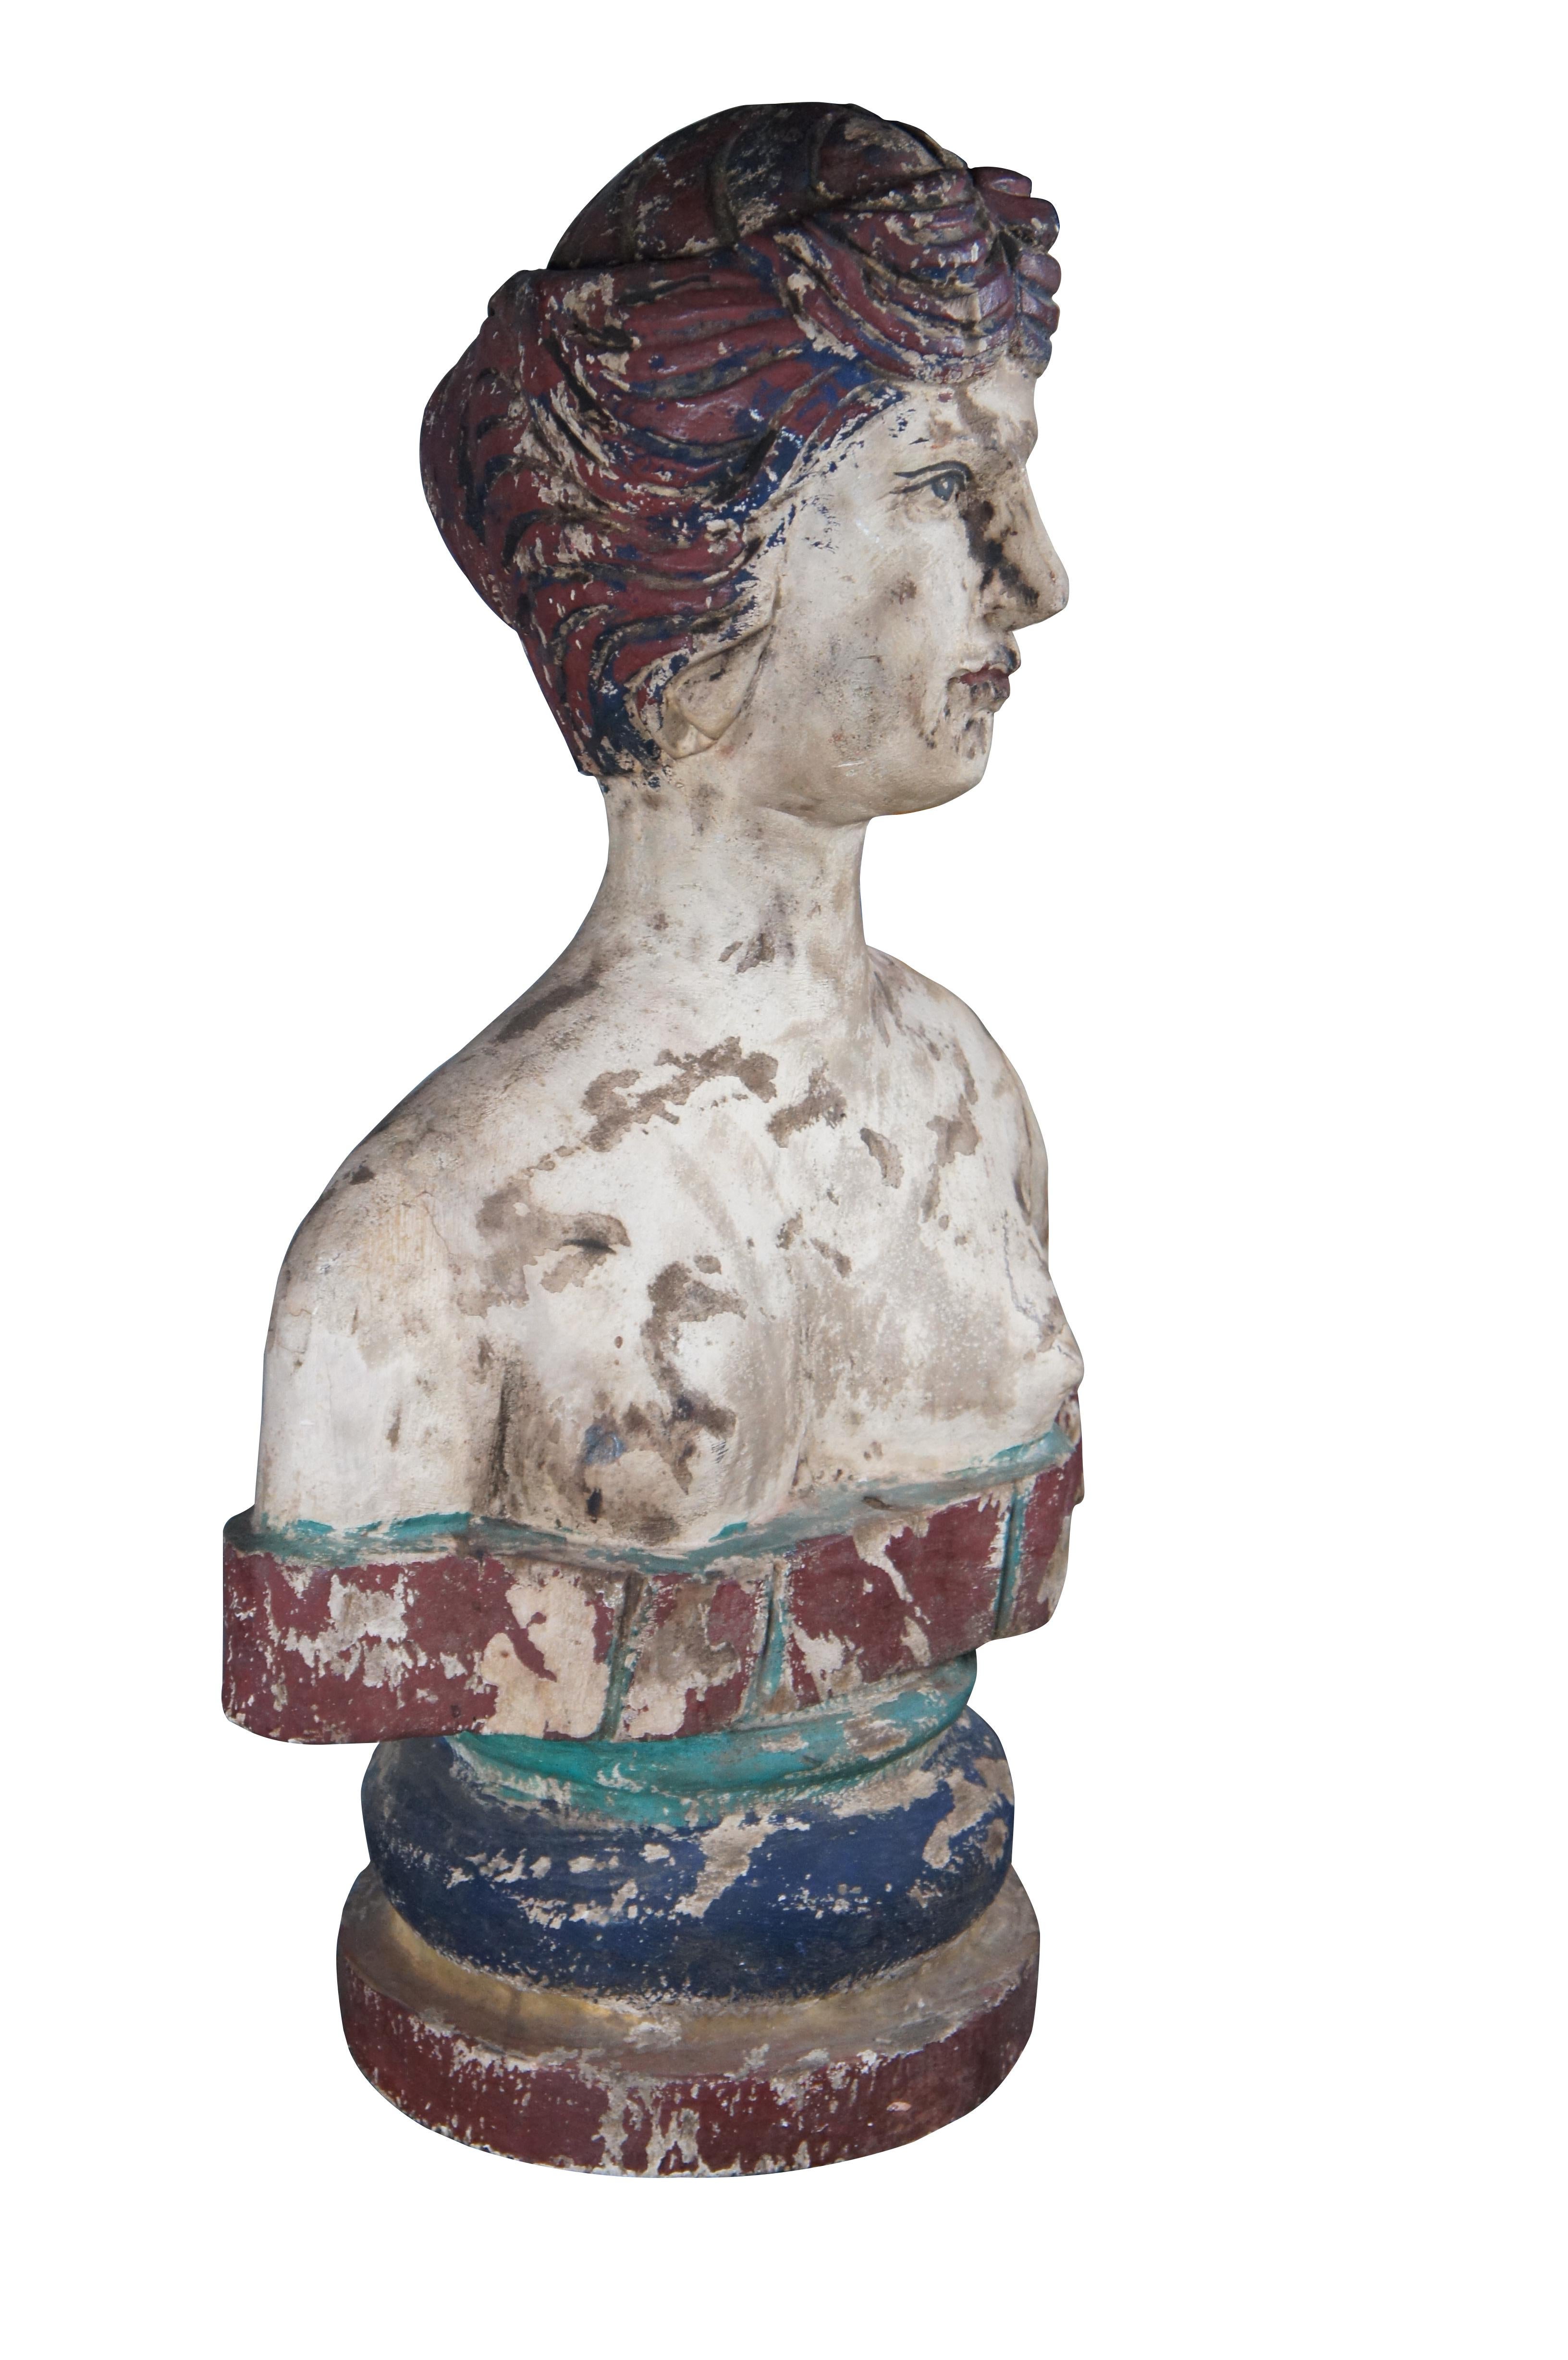 Primitive hand carved polychrome shoulder length bust. Carve from wood with intricate detail and a rustic patina. Great for display on a pedestal or table.

Dimensions:
17